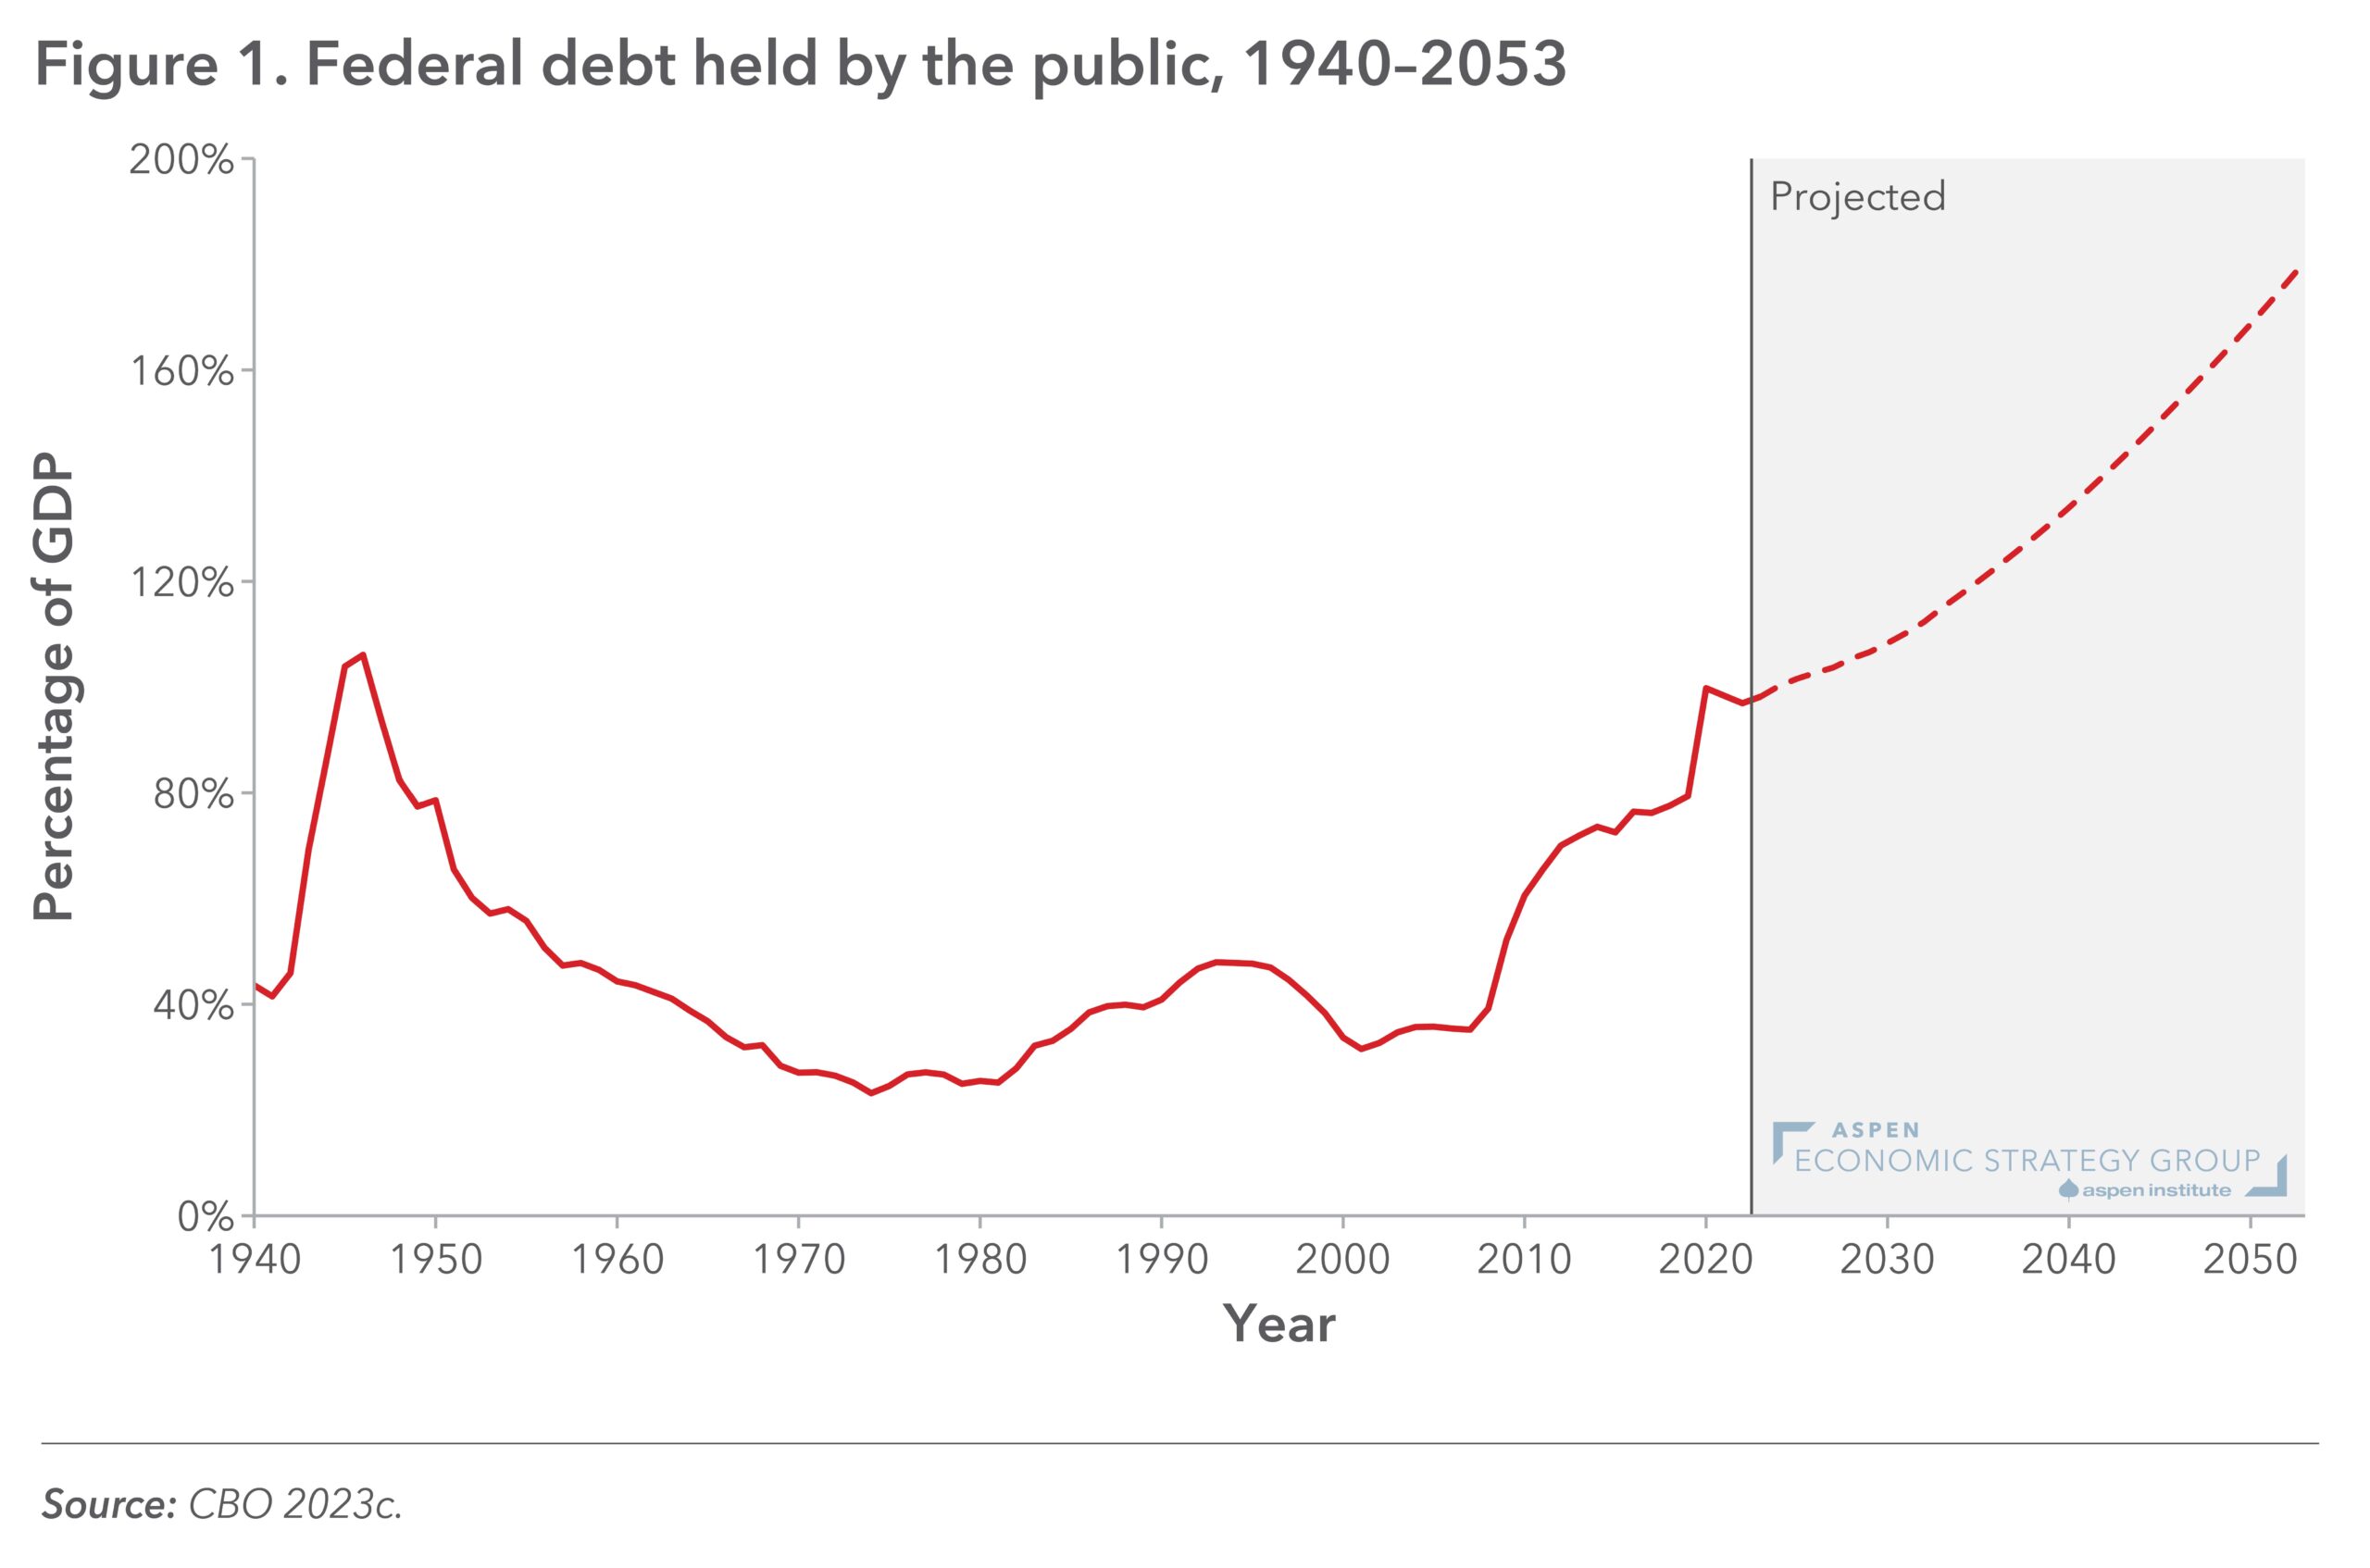 Figure 1: Federal debt held by the public, 1940-2053